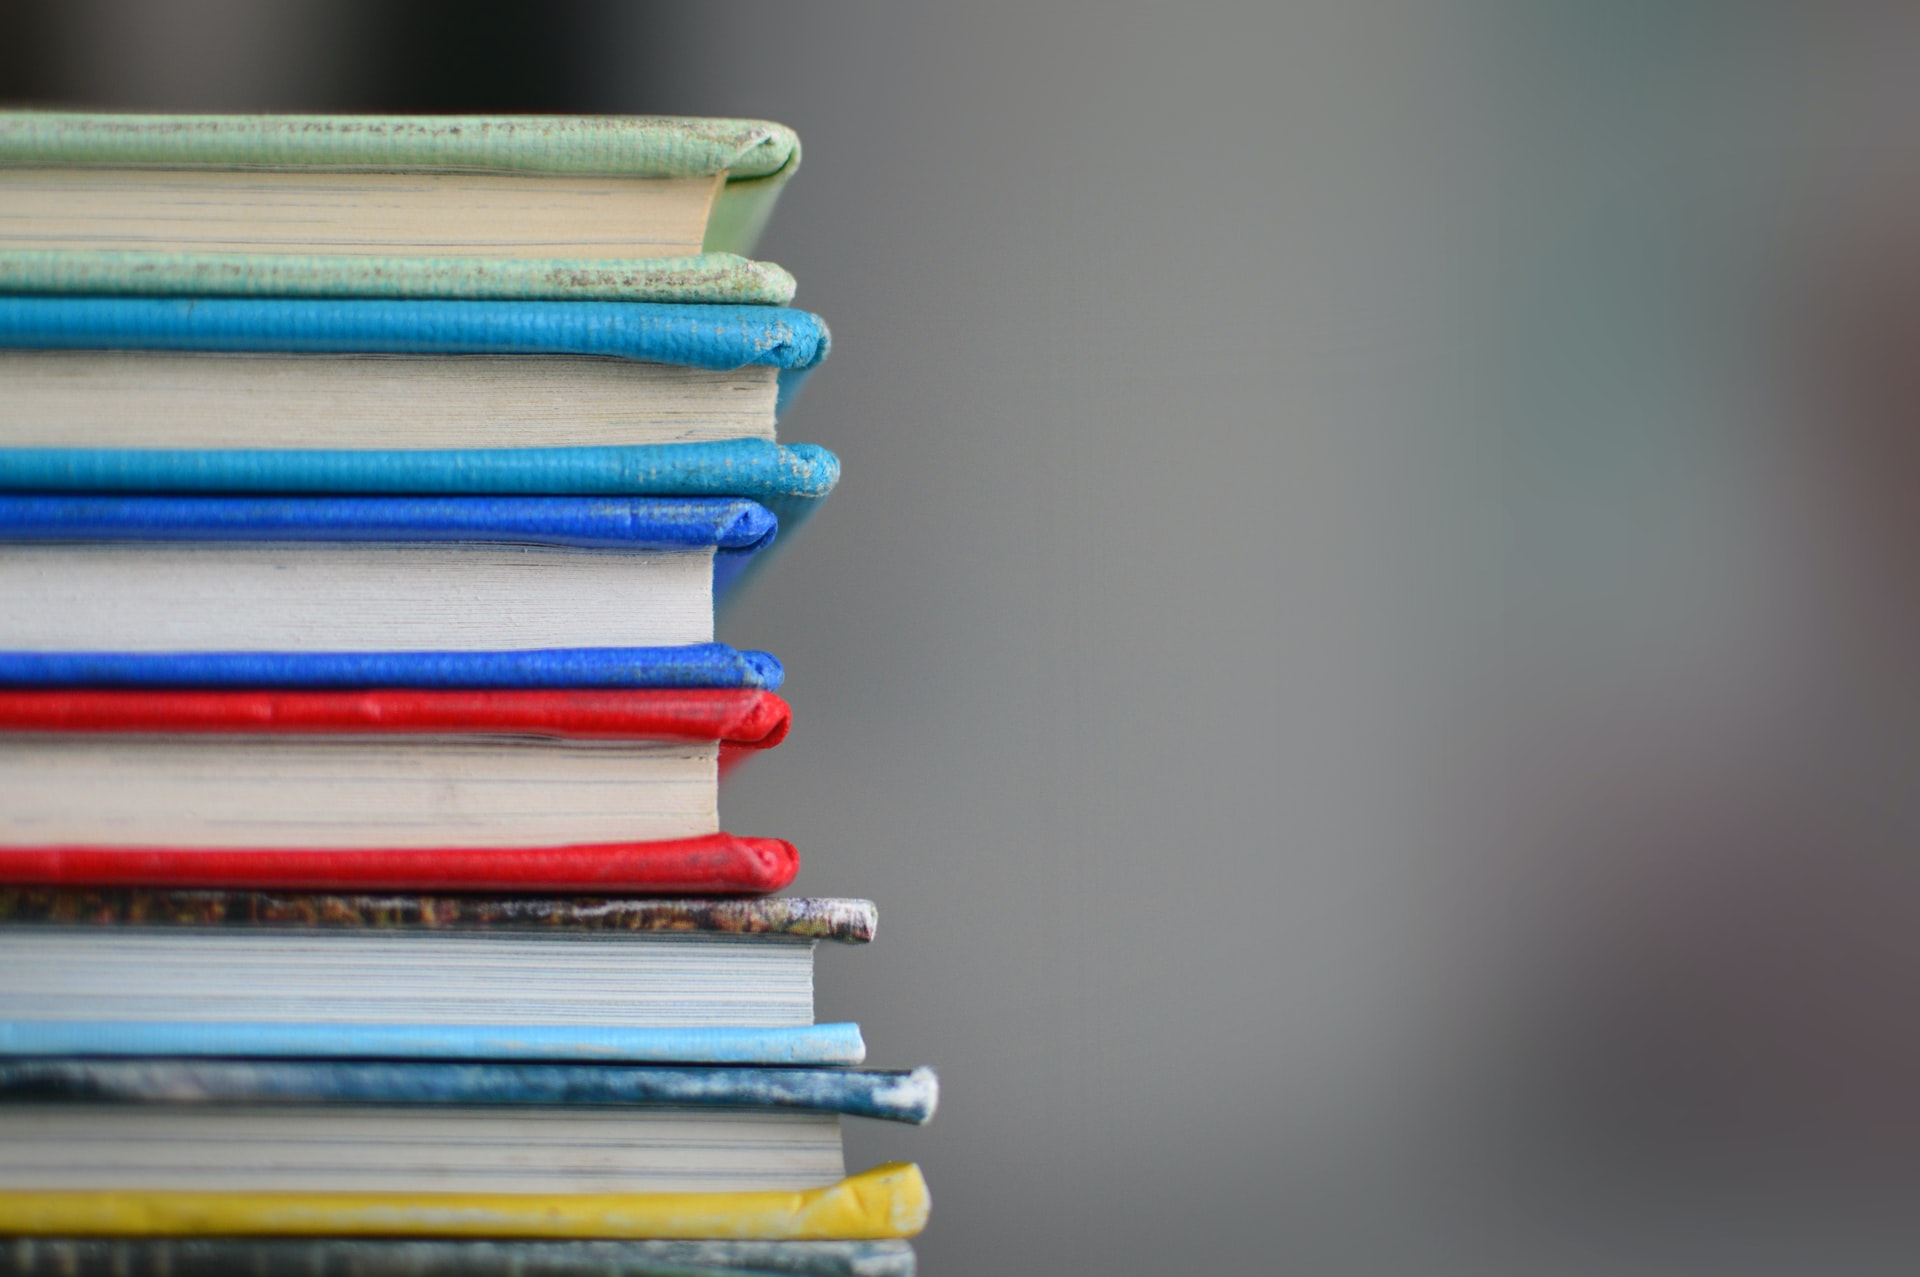 A stack of books on a blurry gray background